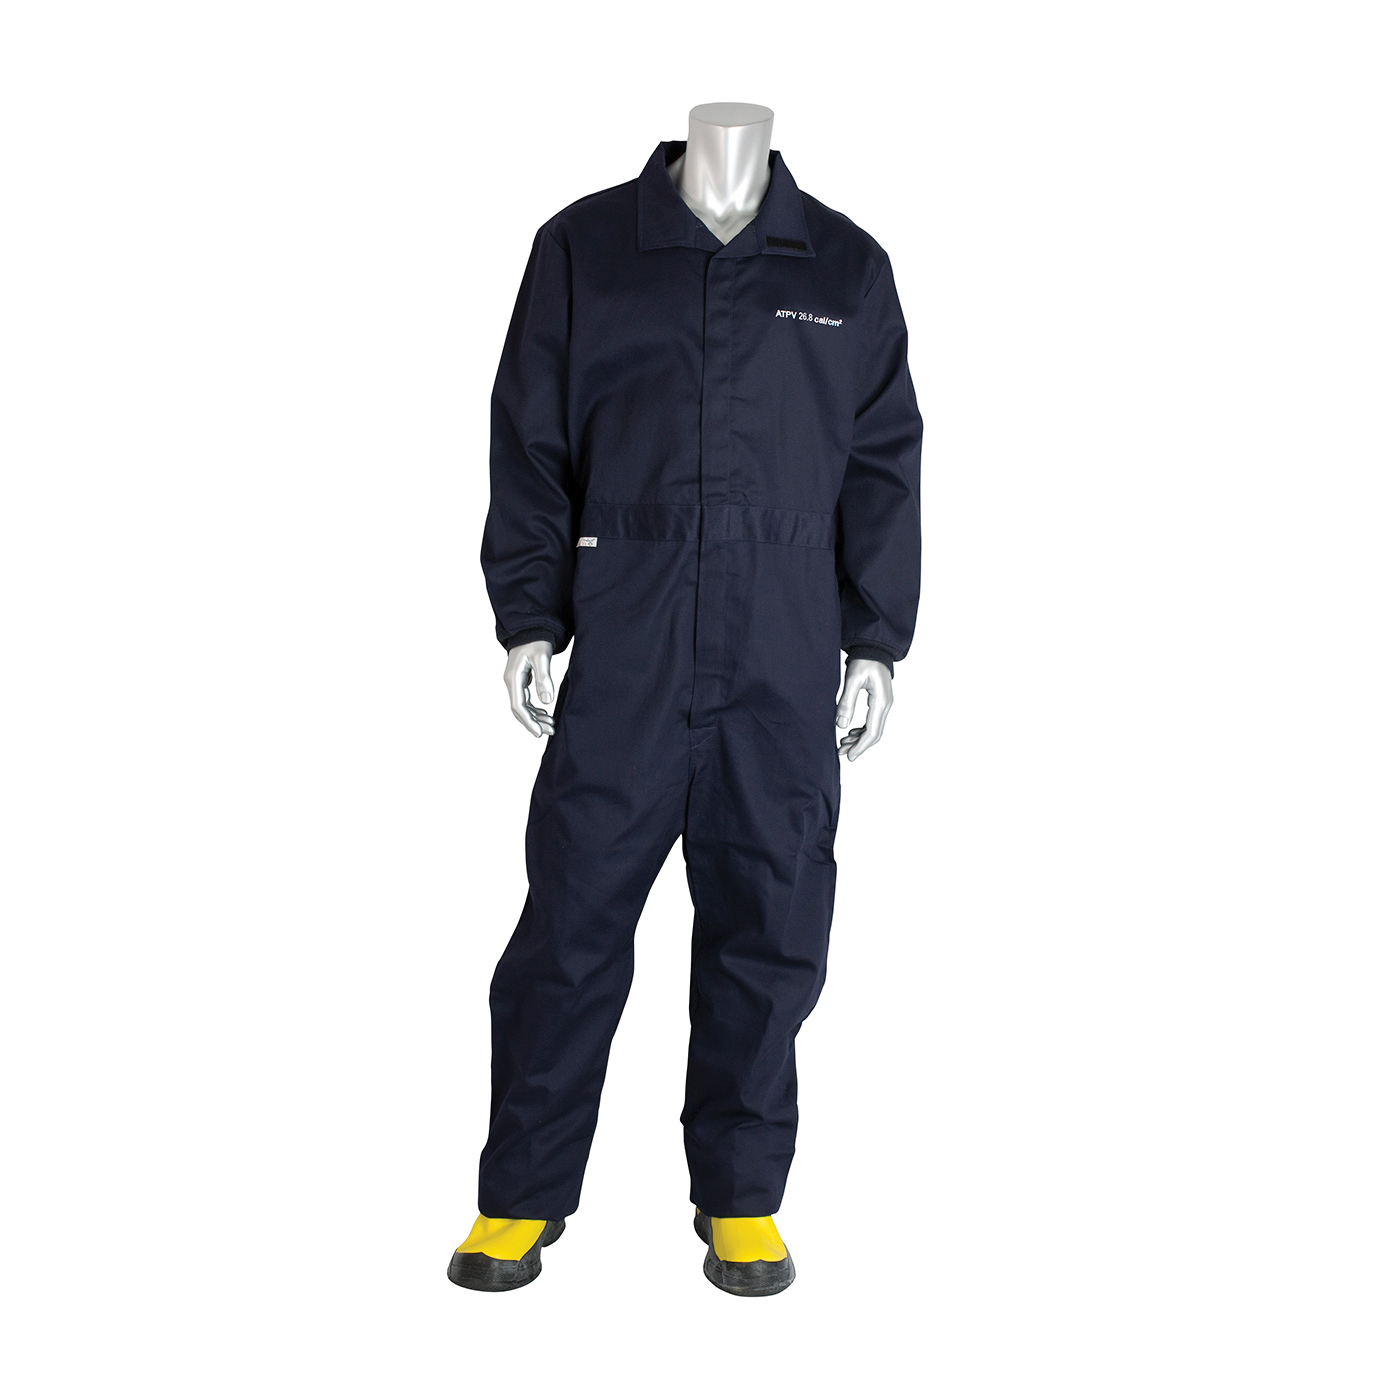 PIP® 9100-52772/S Flame Resistant Coverall, S, Navy, Westex® Ultra Soft®/88% Cotton/12% Nylon, 36 to 38 in Chest, 32 in L Inseam